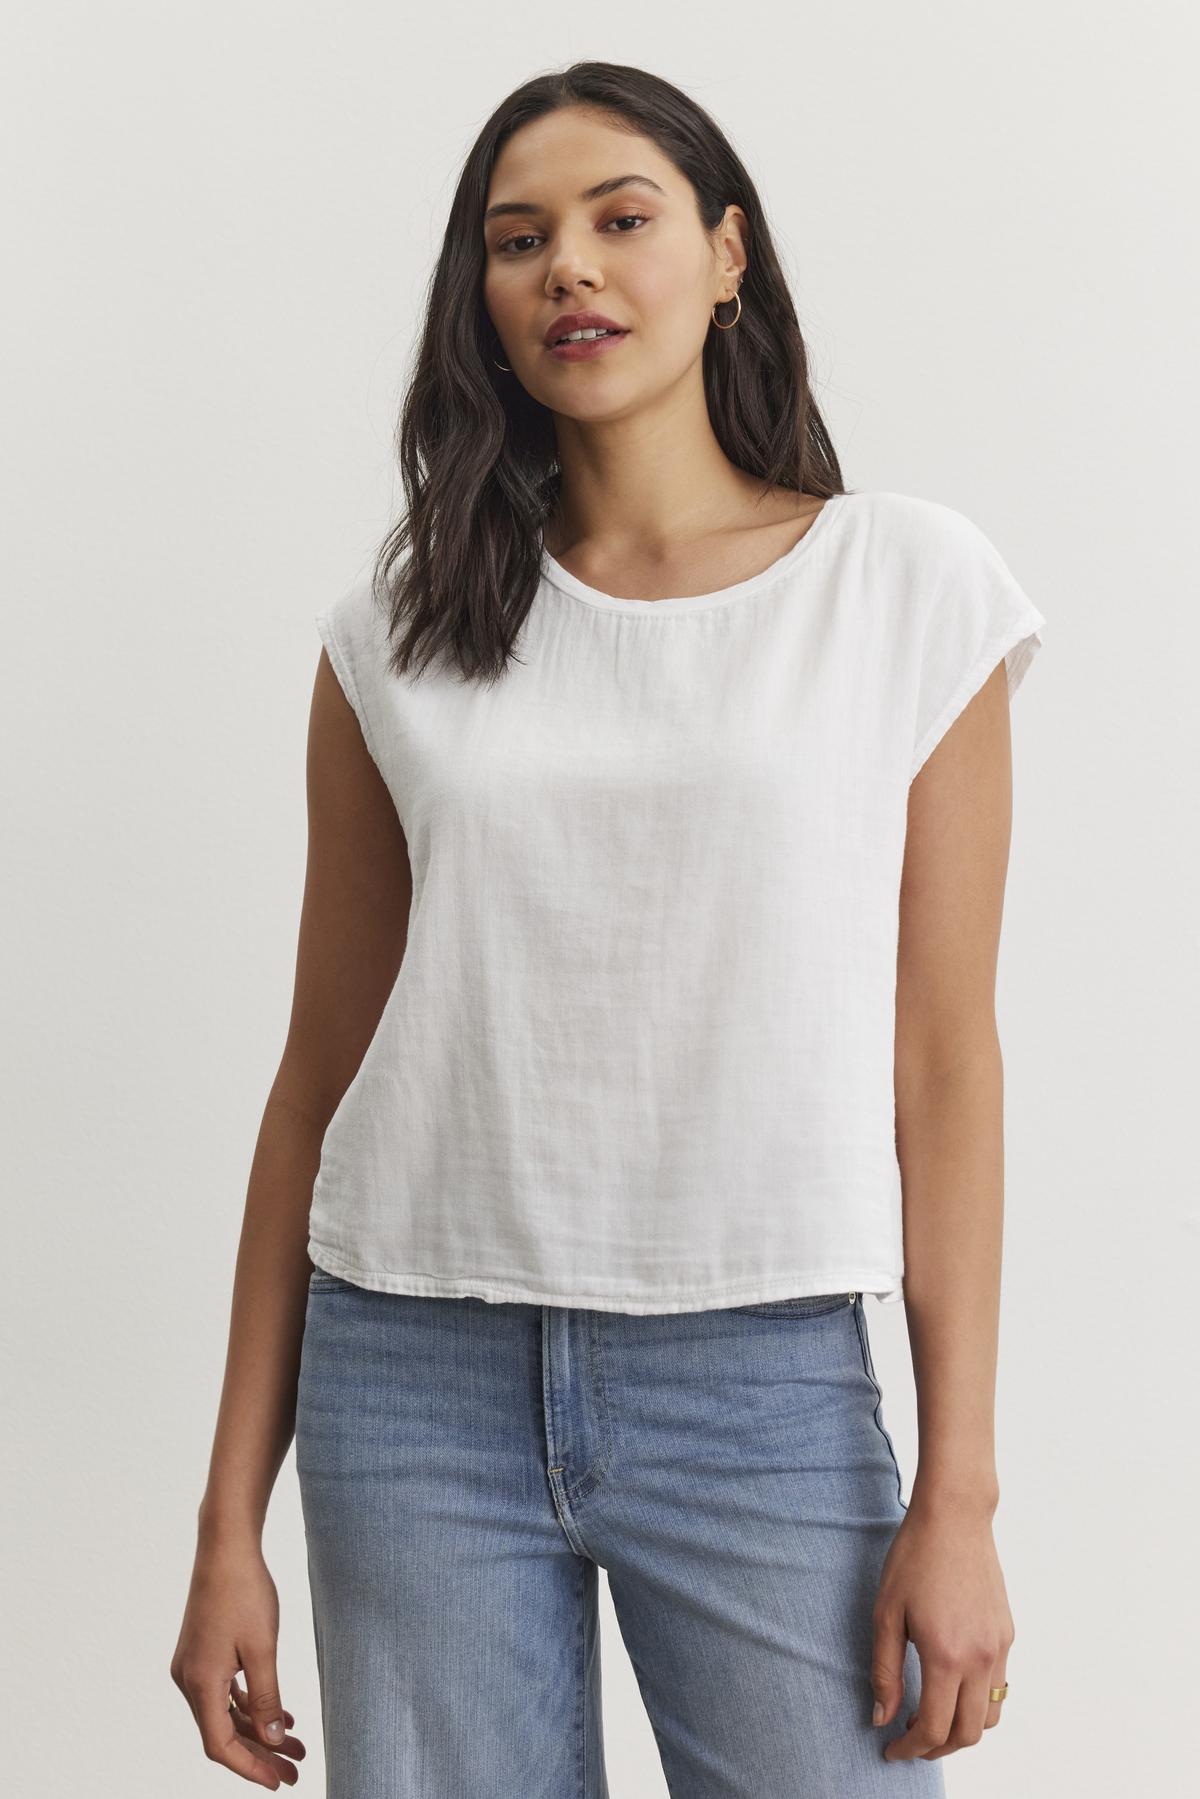   A woman with dark hair, wearing the DANIELLA CREW NECK TEE by Velvet by Graham & Spencer and blue jeans, stands against a plain white background. 